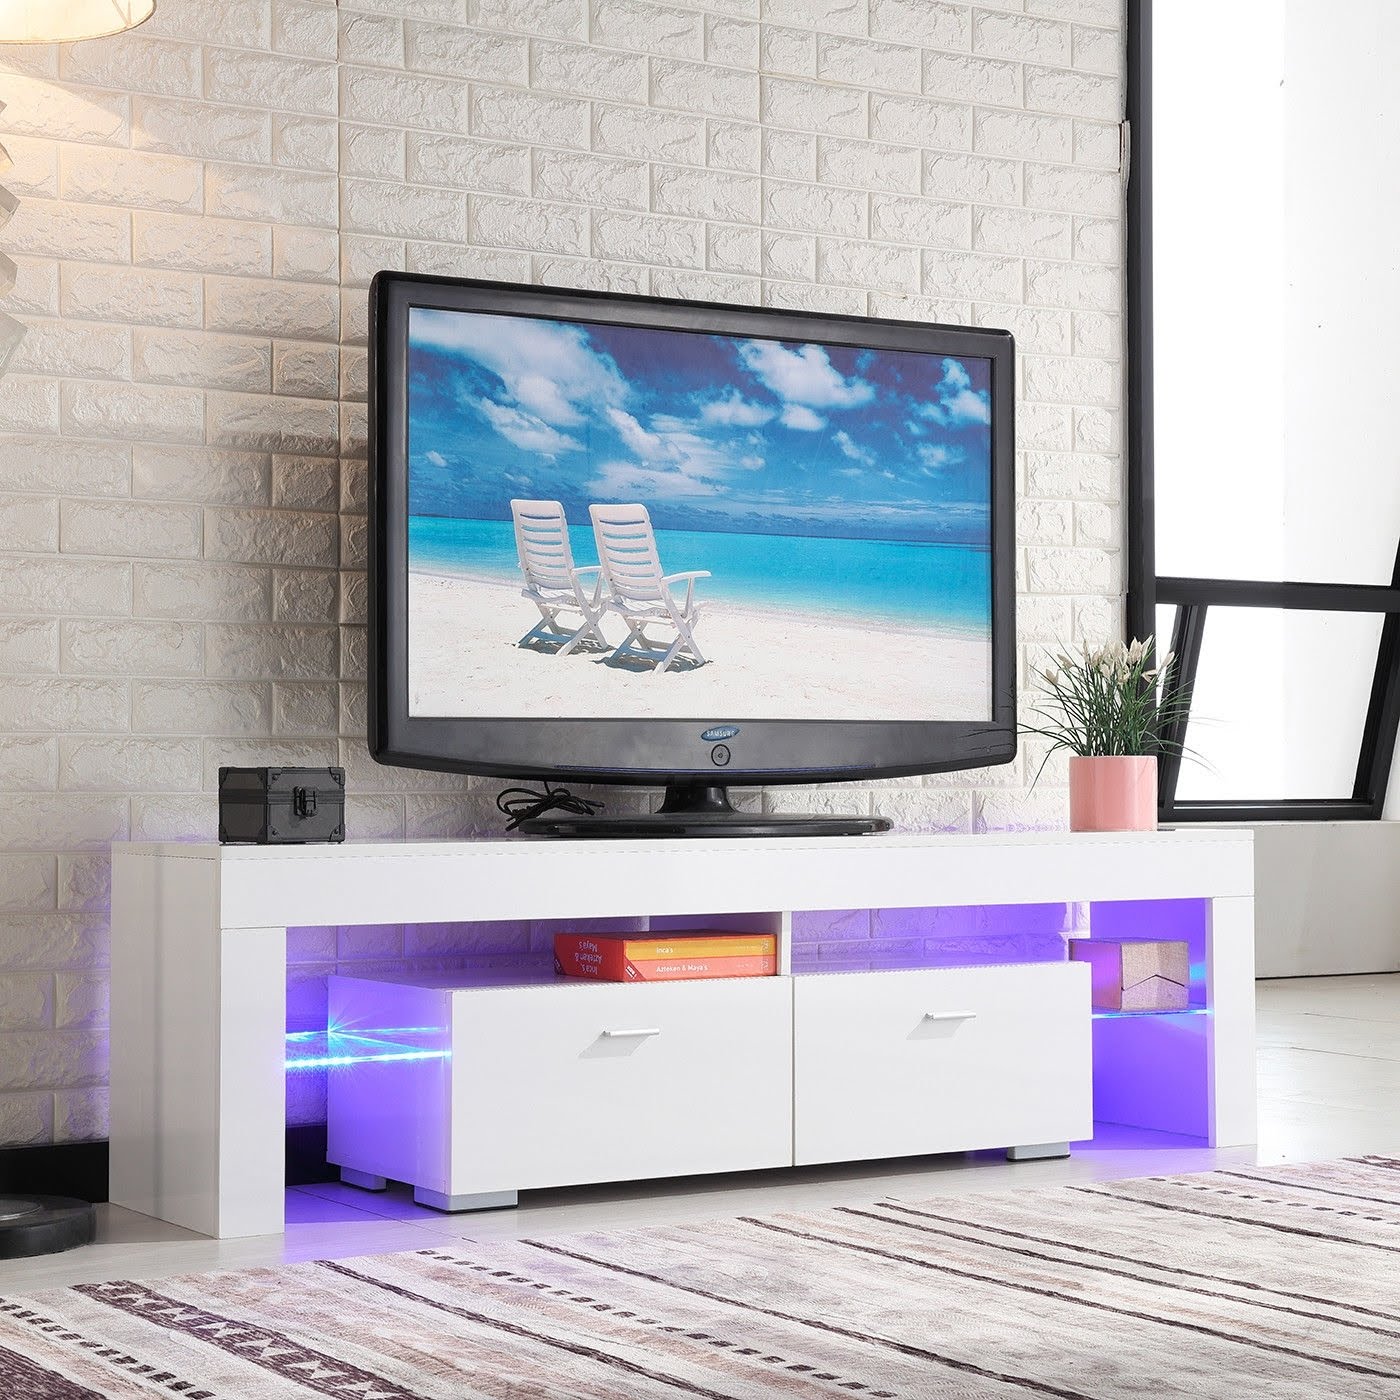 Senvoziii LED TV Stand White High Gloss Sideboard TV Cabinet Entertainment with 3 Doors and Glass Shelves for Living Room Furniture